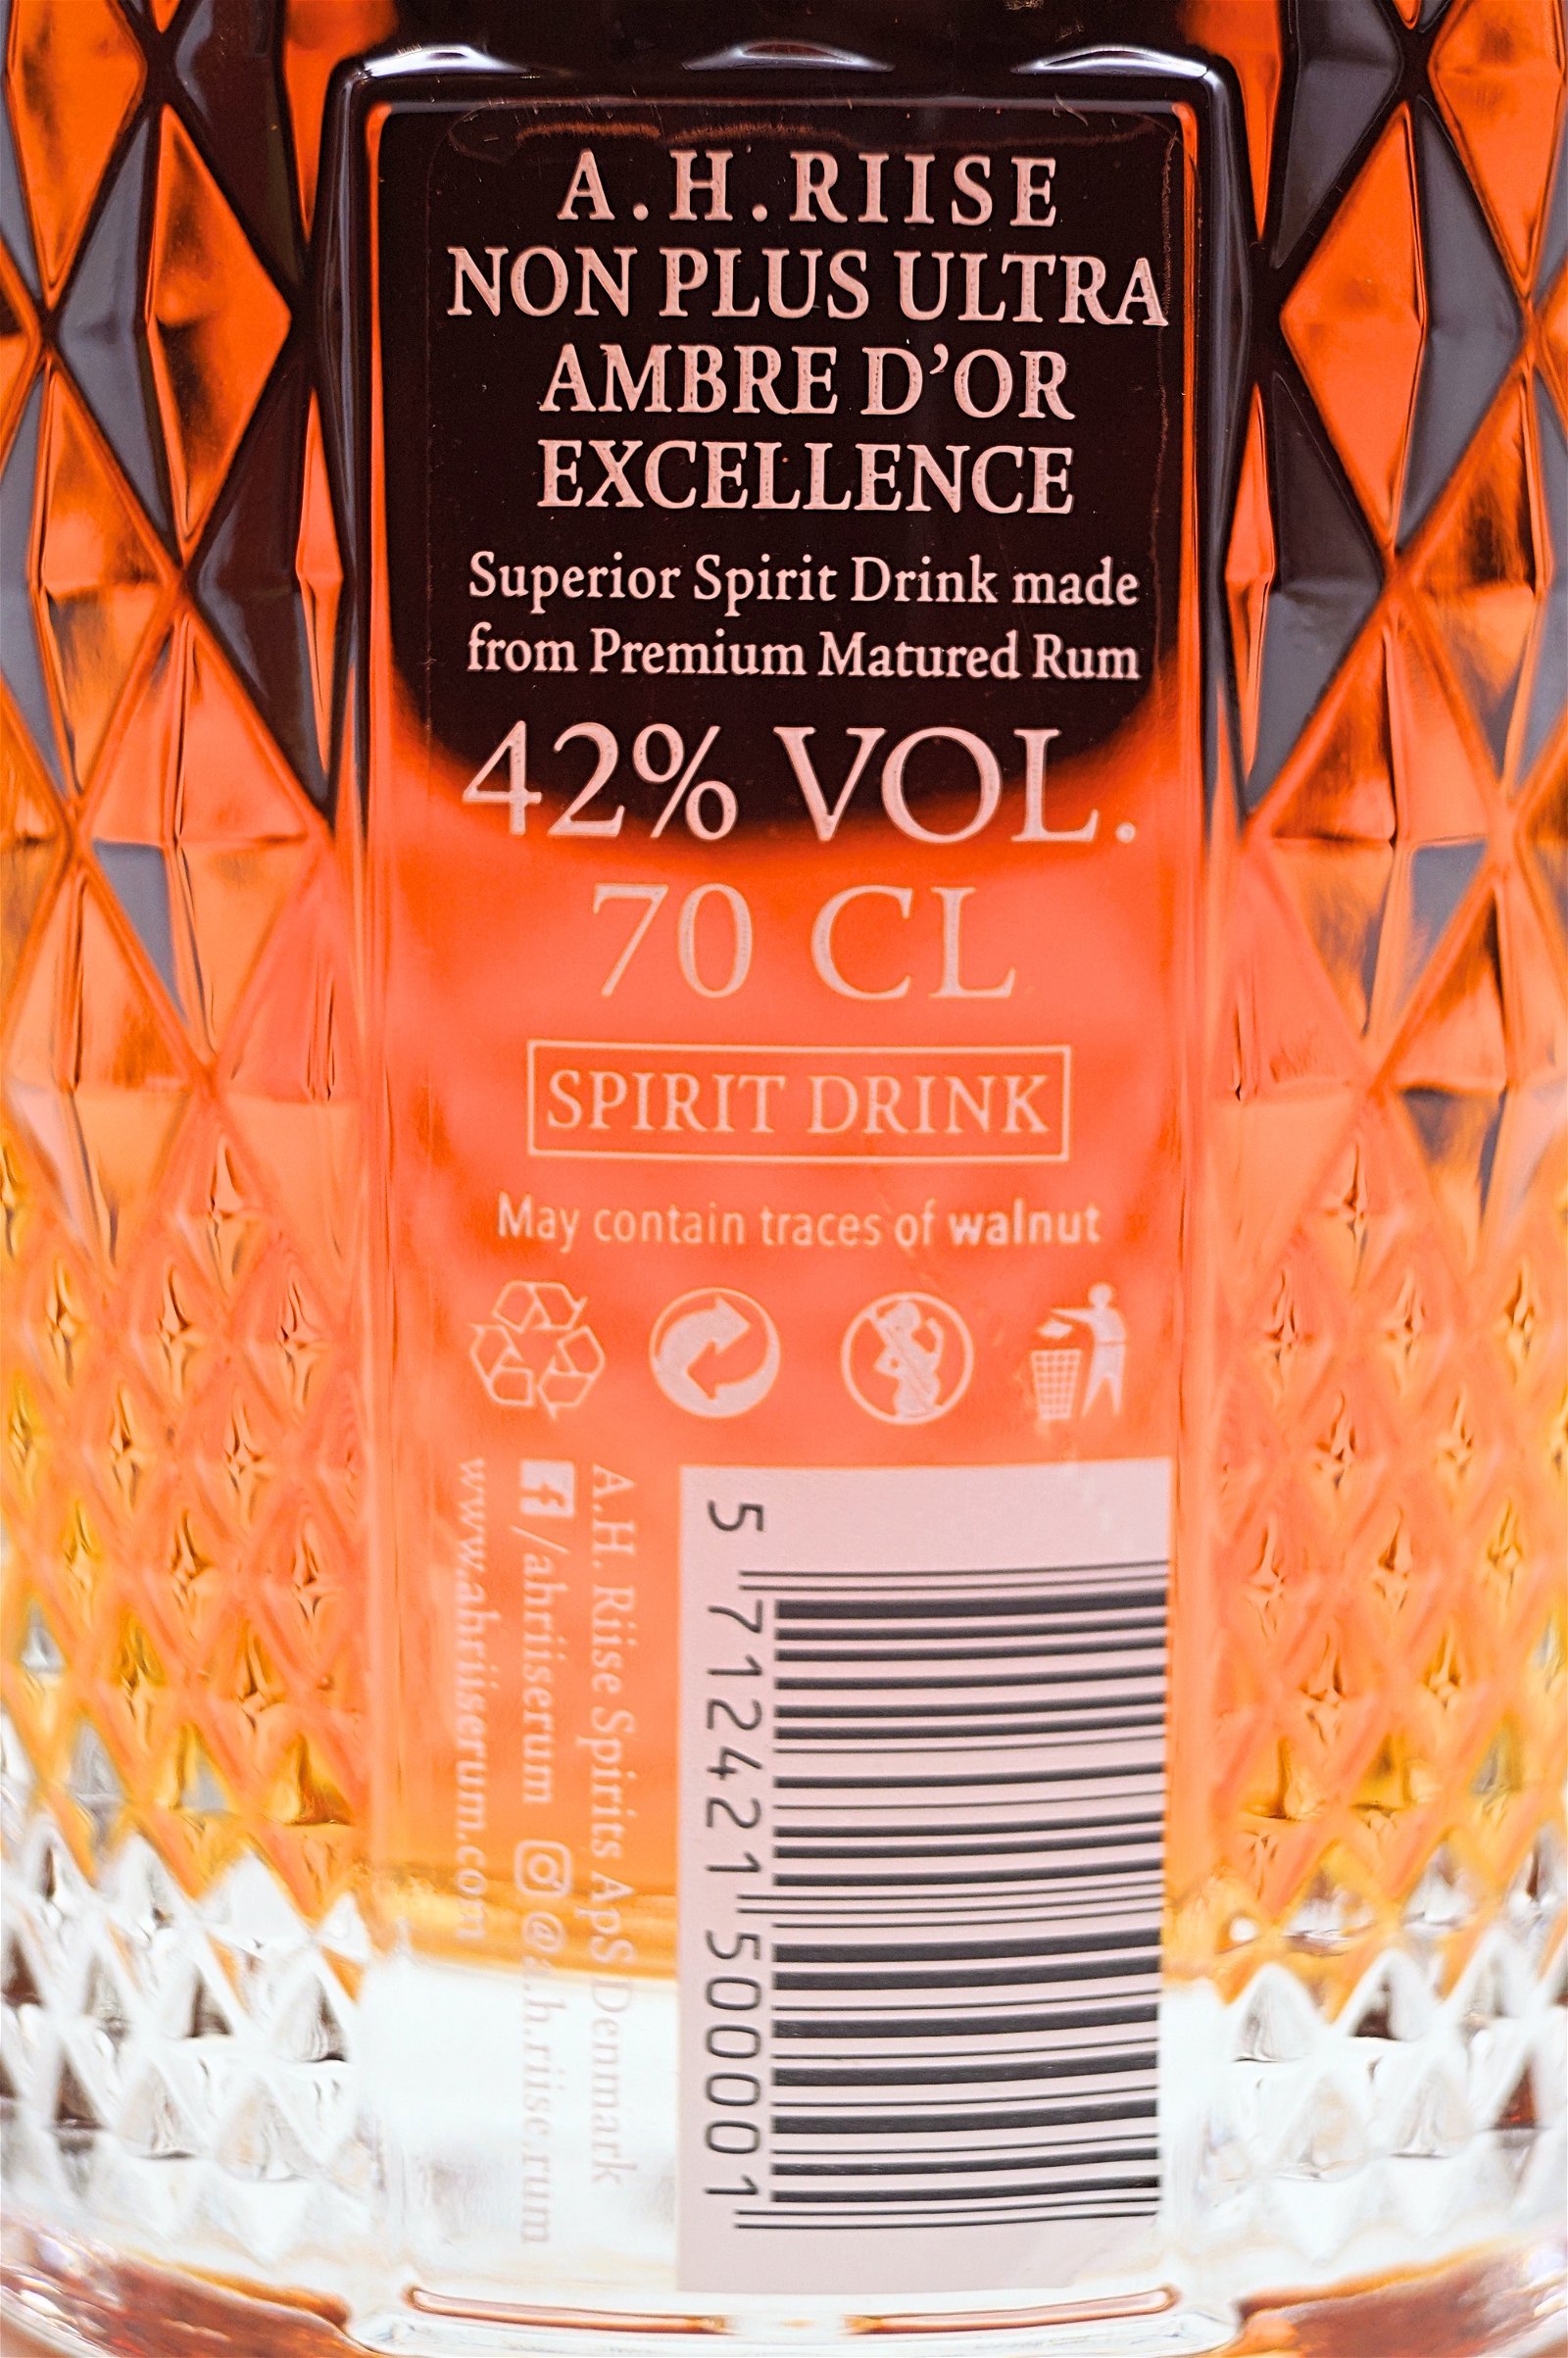 A.H.Riise Non Plus Ultra Ambre d Or Excellence Rum